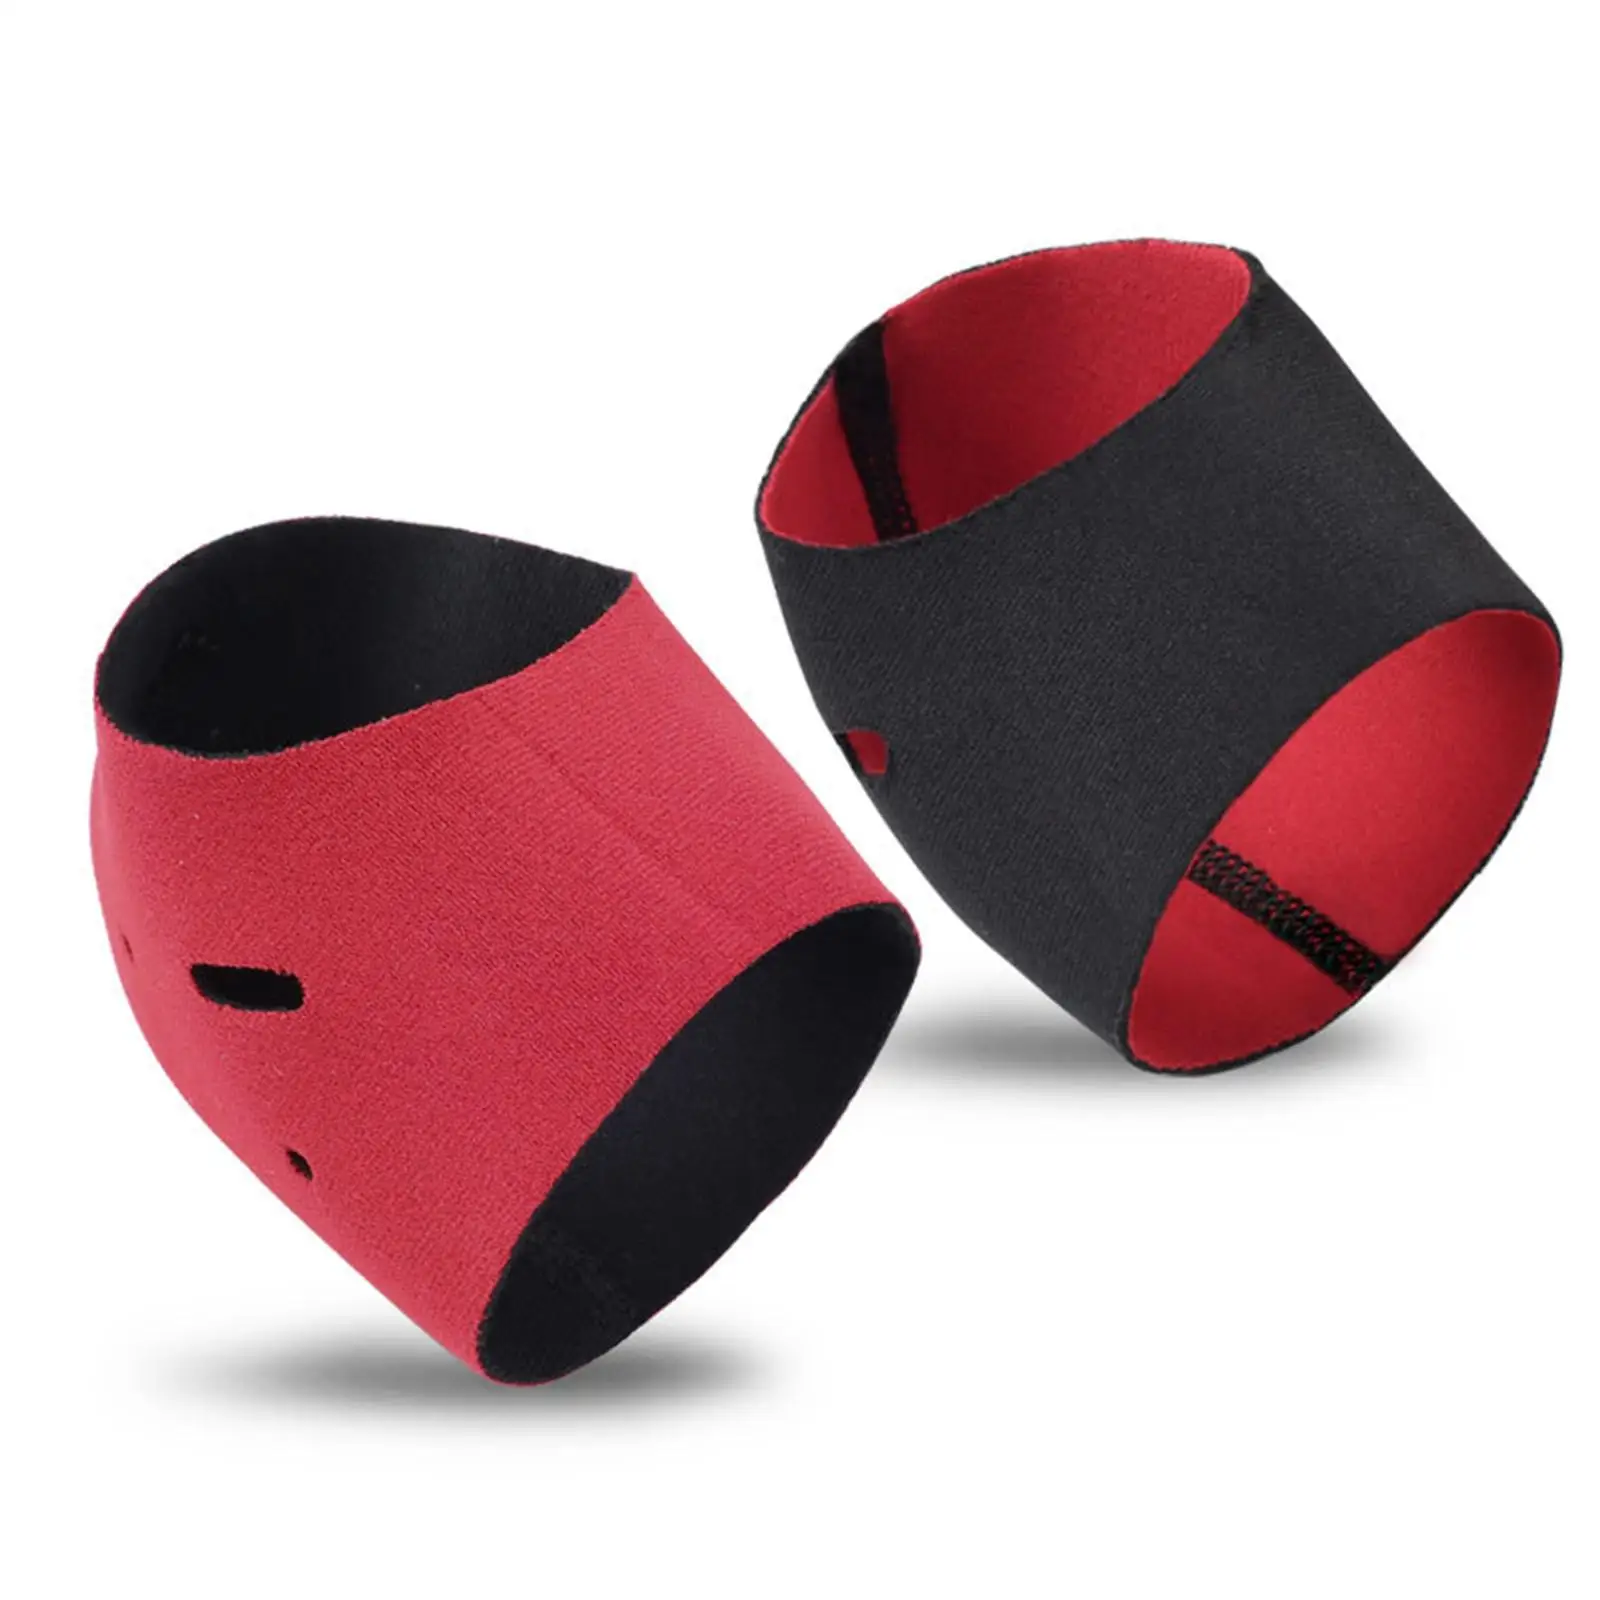   Cups, Breathable  Guard Inserts  Sleeves Pads Support for Aching Sore Repair   Pain 